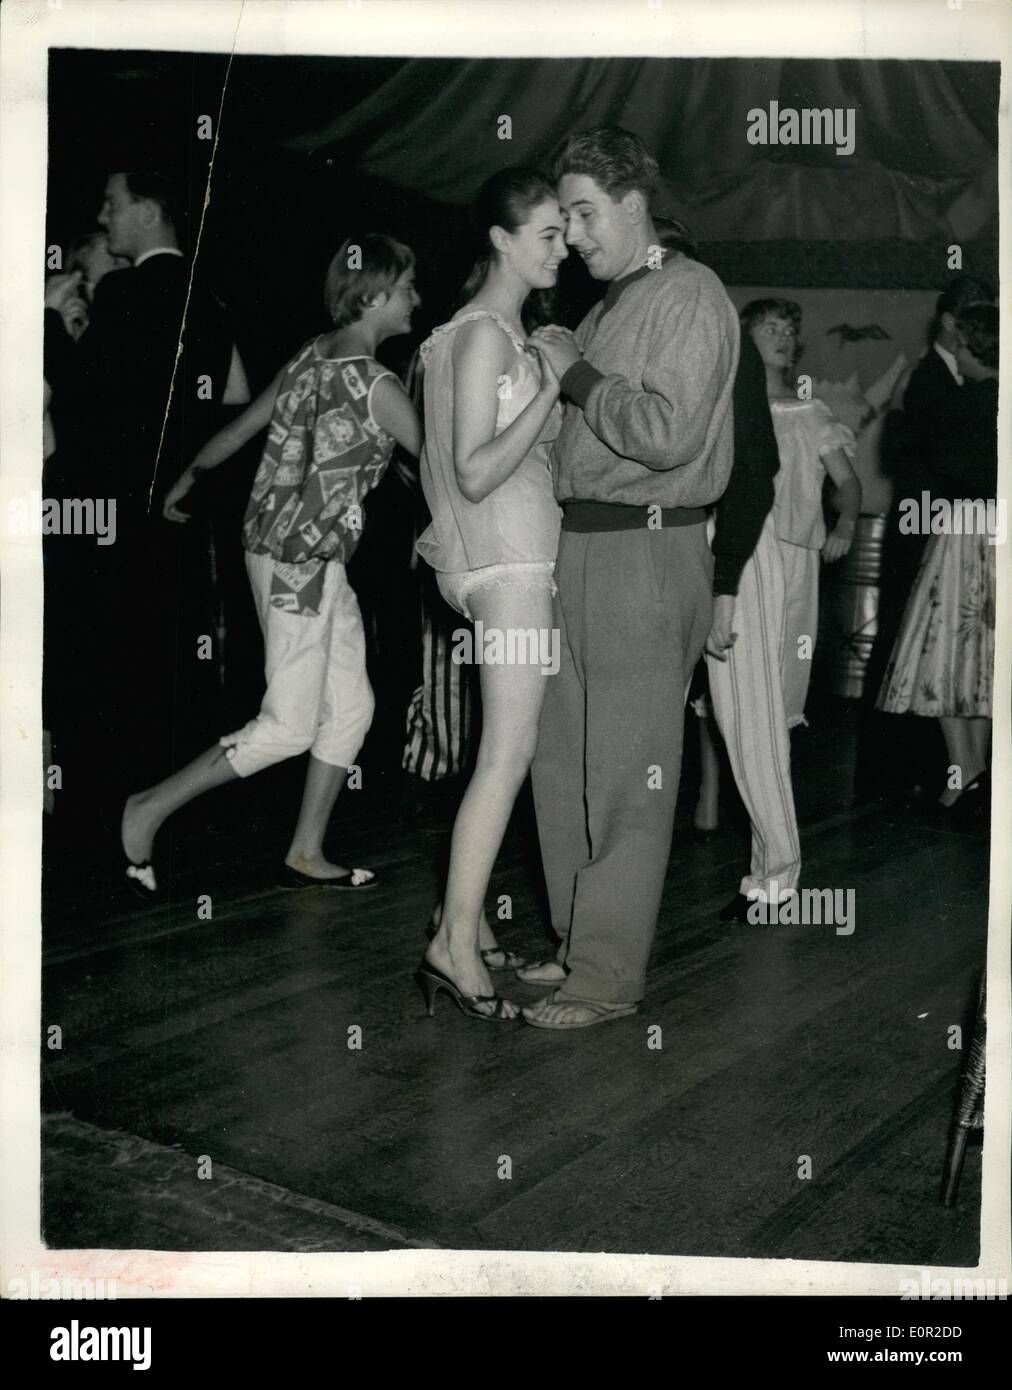 Oct. 10, 1957 - Playboy Tony Moynihan goes to a hectic party Ã¢â‚¬â€œ Tony Moynihan the playboy son of Lord Moynihan was one of Stock Photo